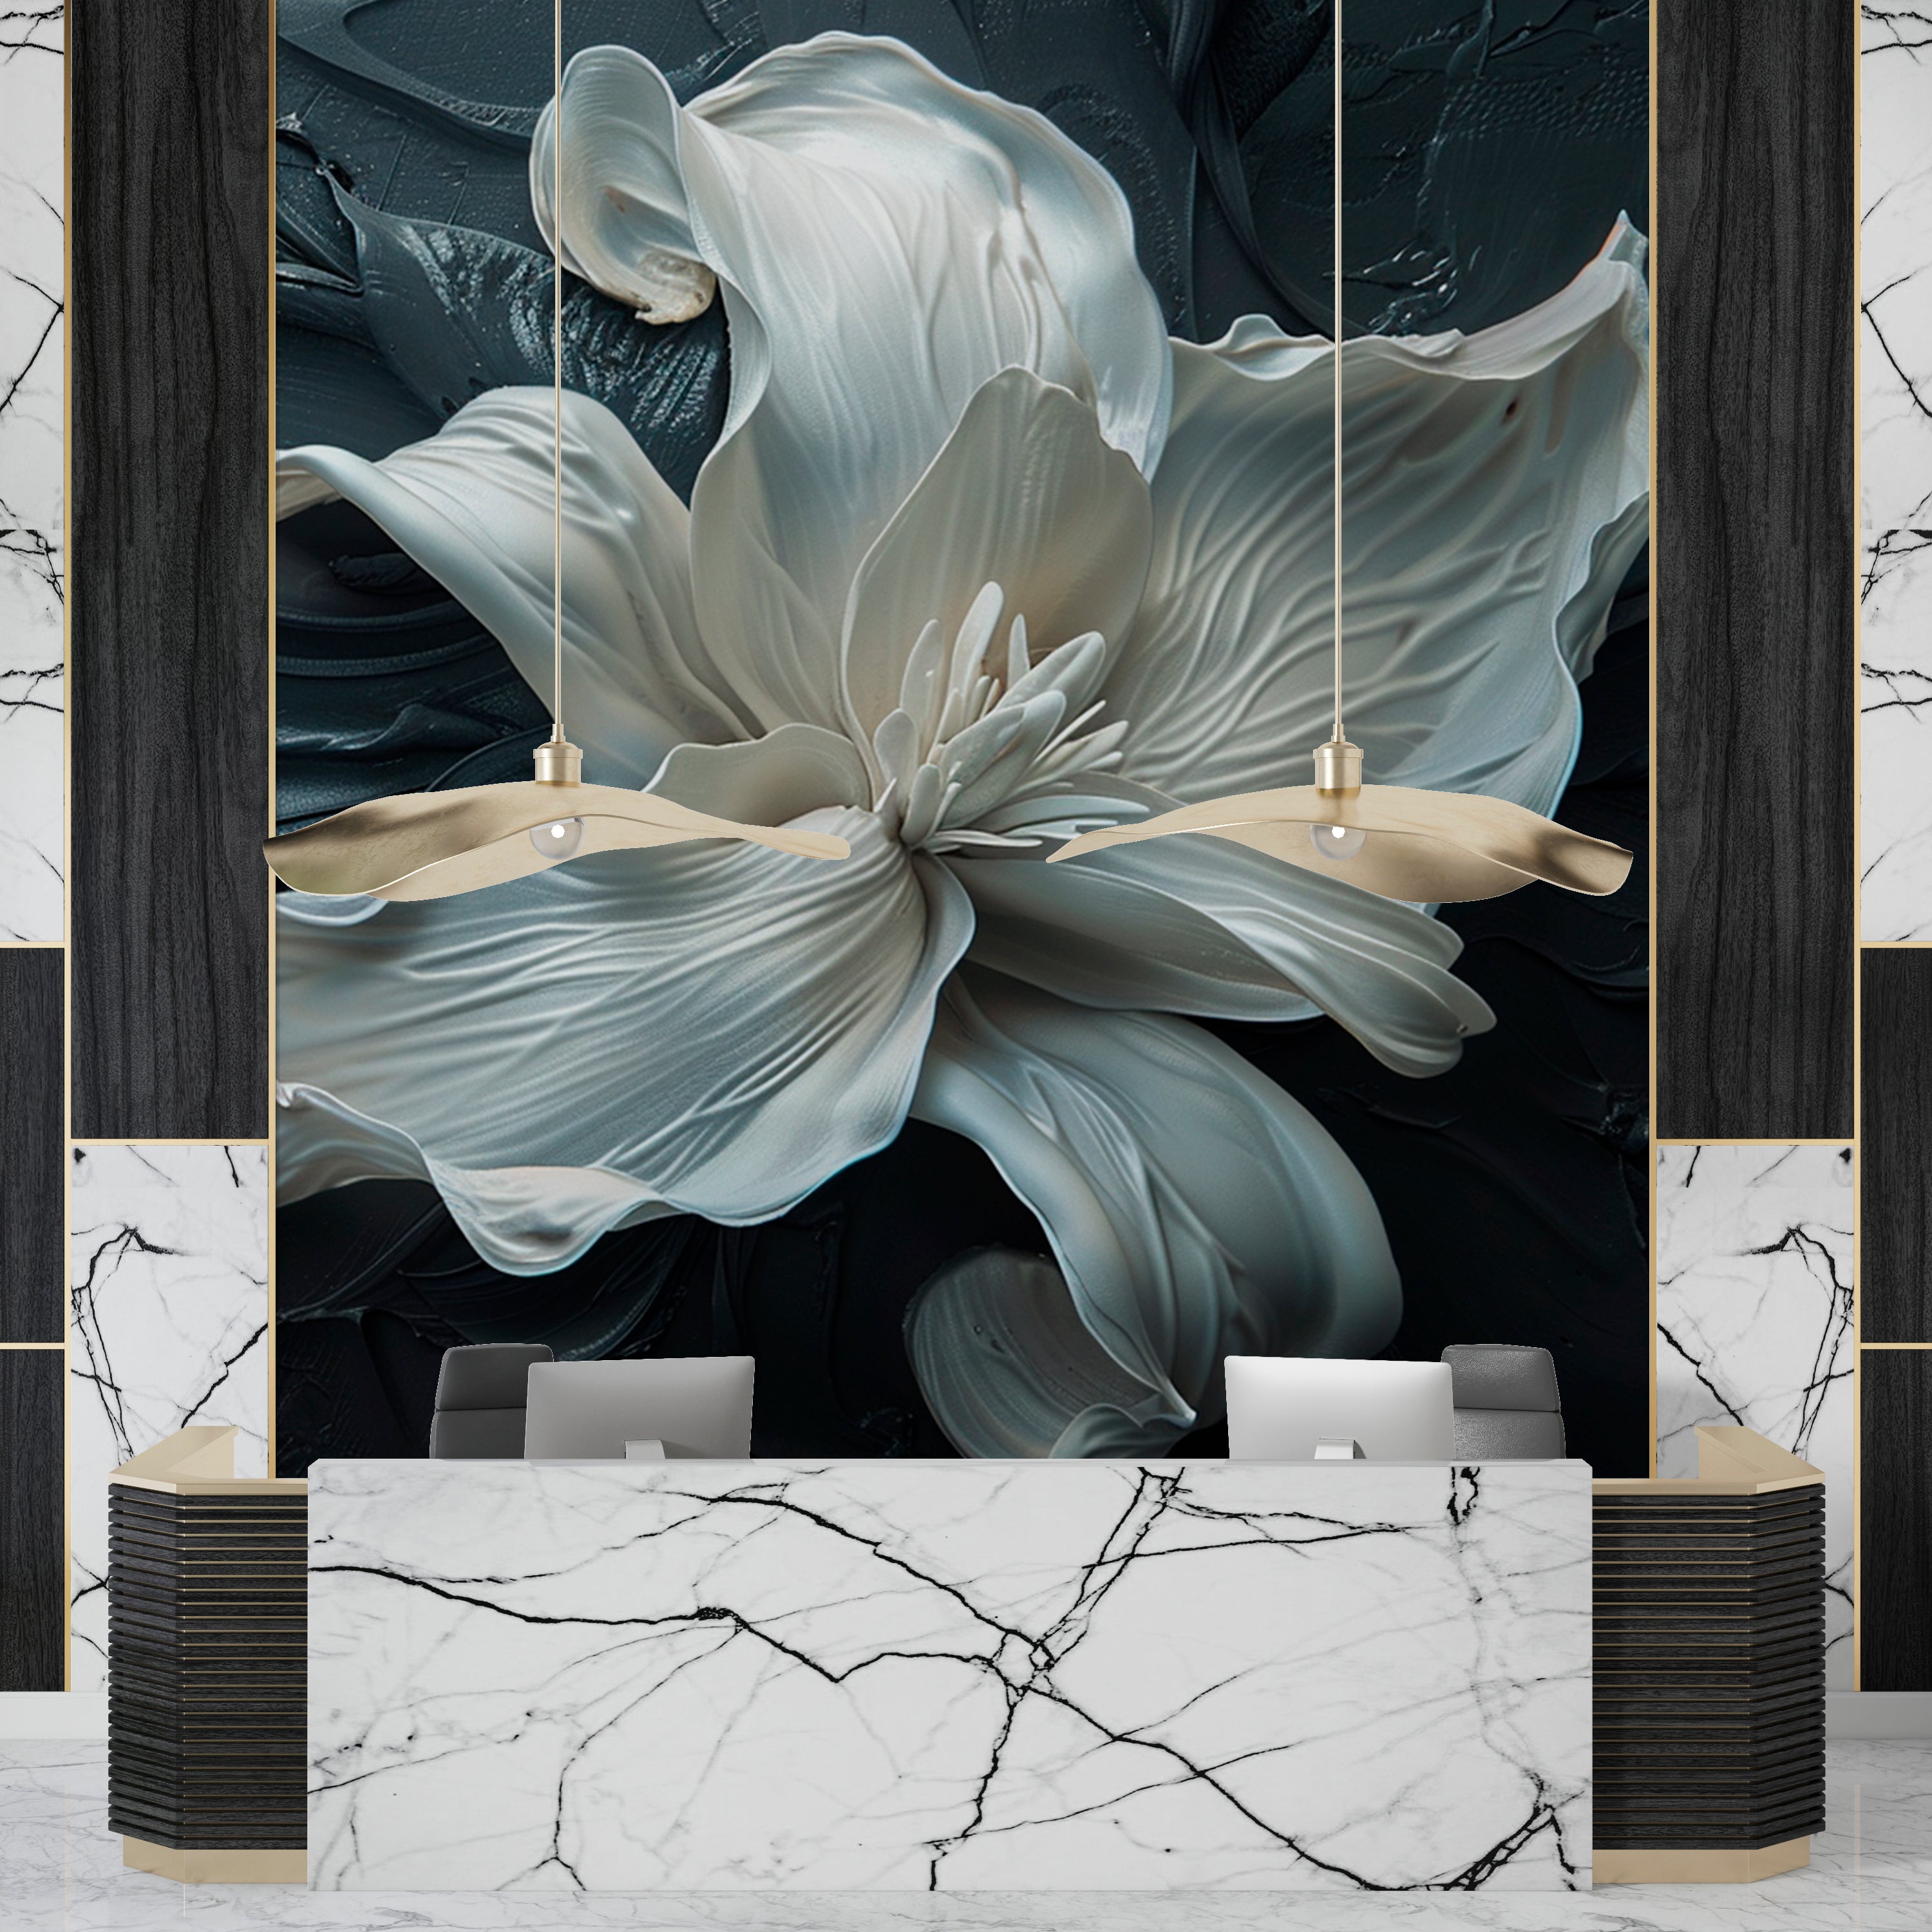 Sublime Flower: Harmony of White and Black